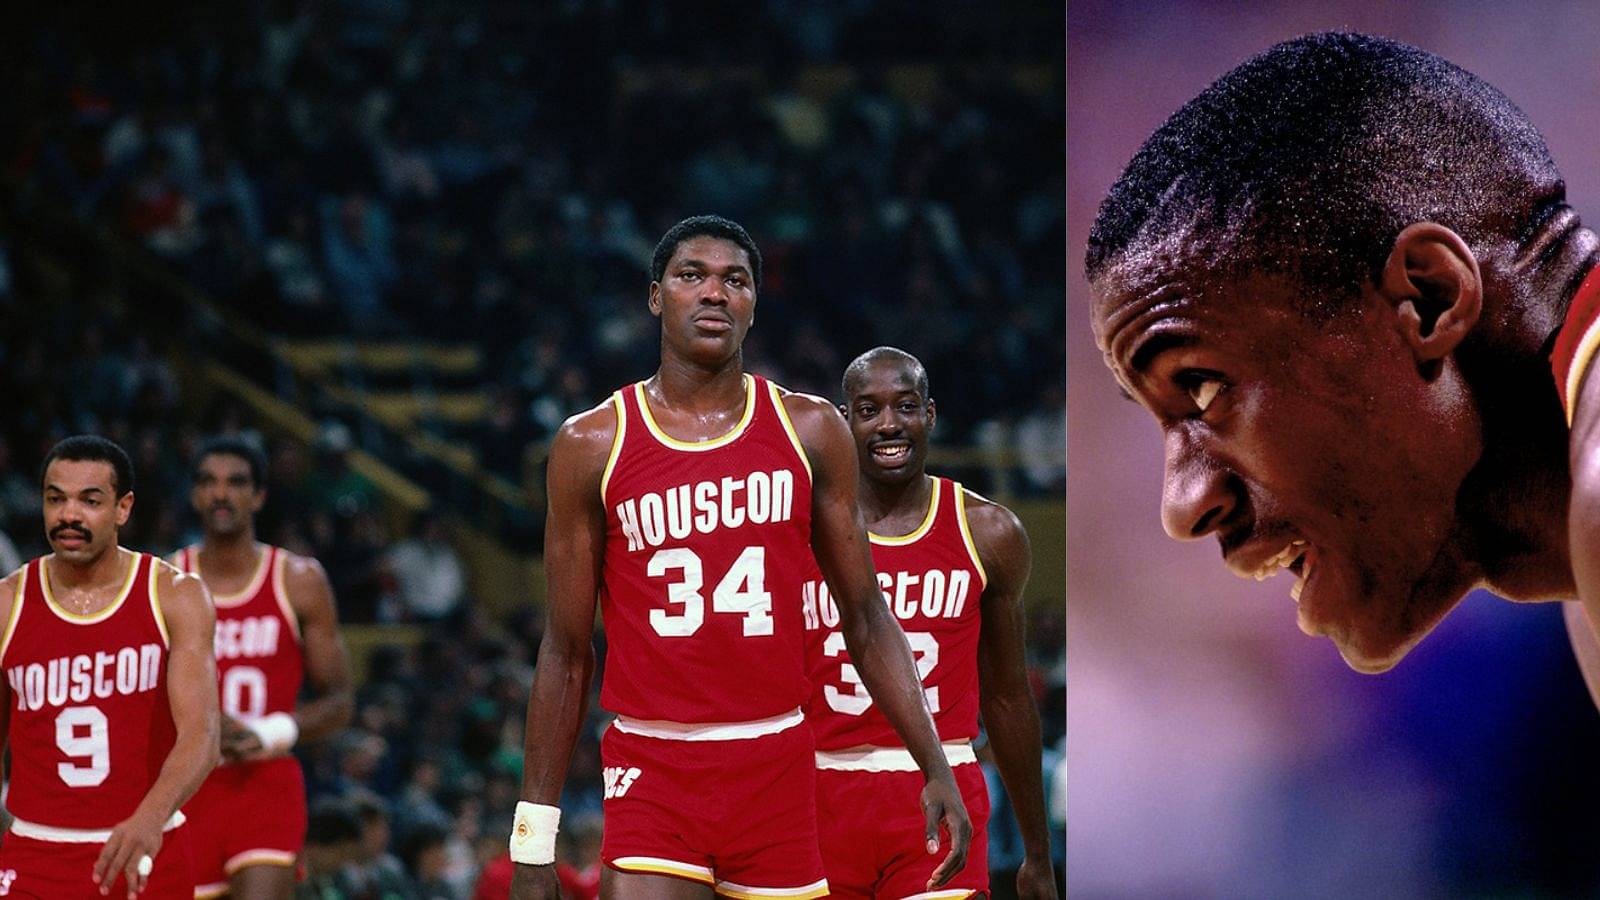 Hakeem Olajuwon would have gotten STABBED by his $4M worth Houston Rockets teammate if police officers hadn’t arrived in time